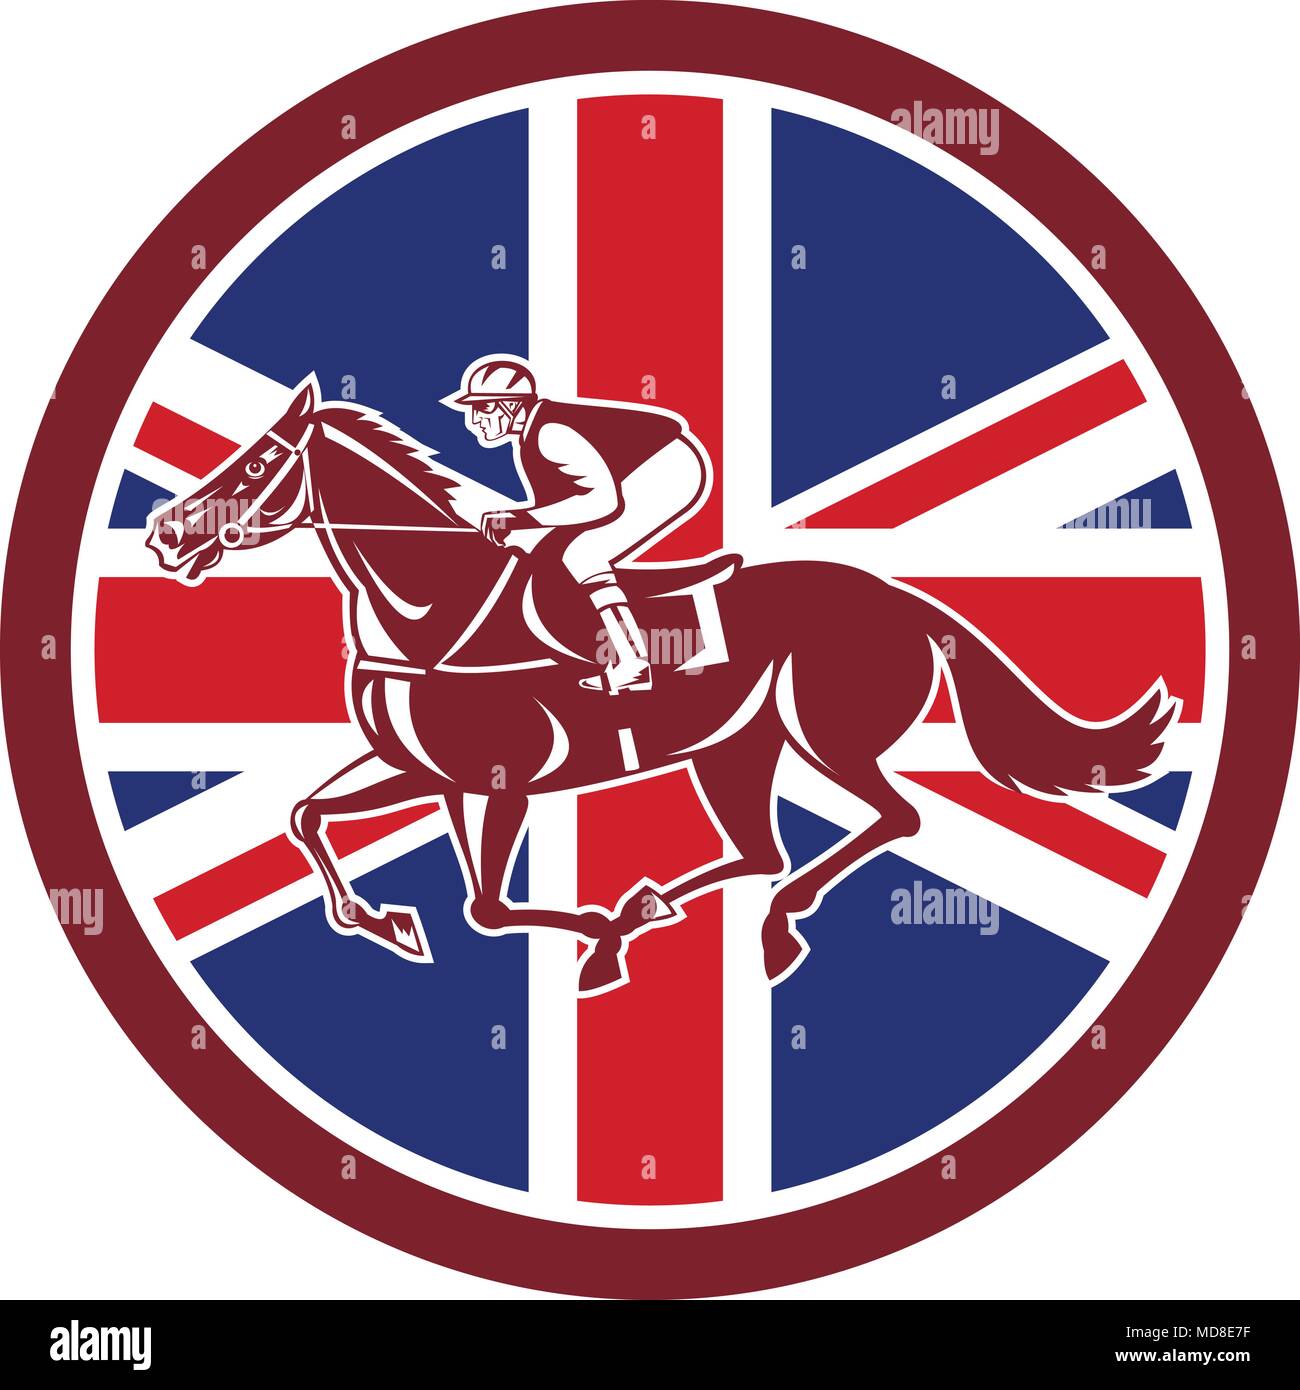 Icon retro style illustration of a British jockey or equestrian horse racing viewed from side with United Kingdom UK, Great Britain Union Jack flag se Stock Vector